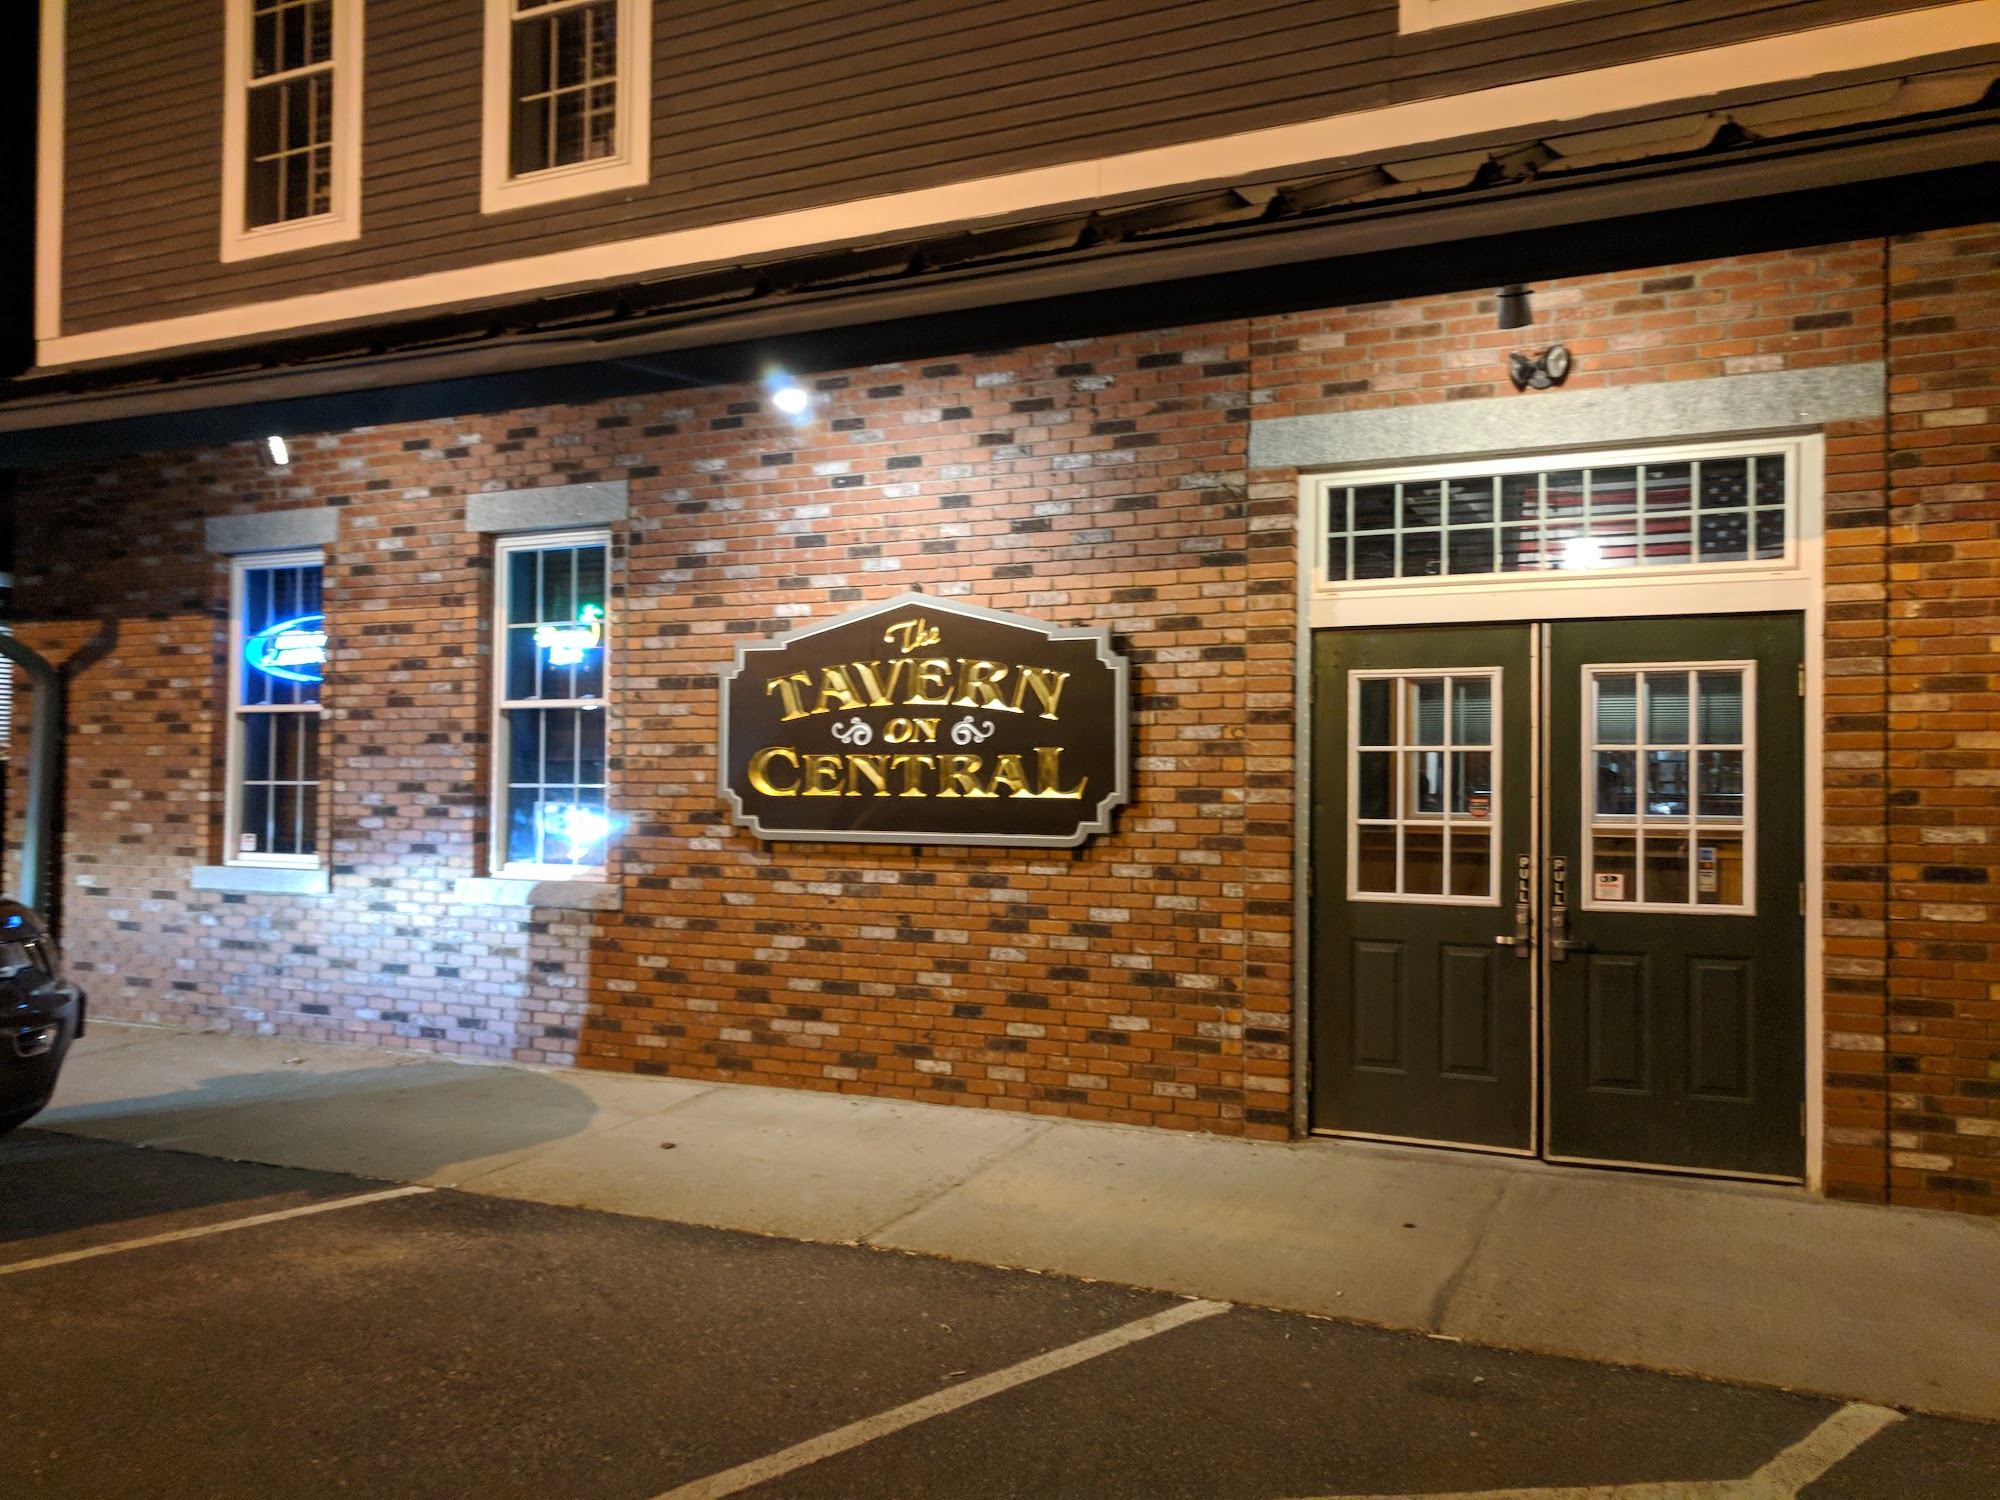 The Tavern on Central